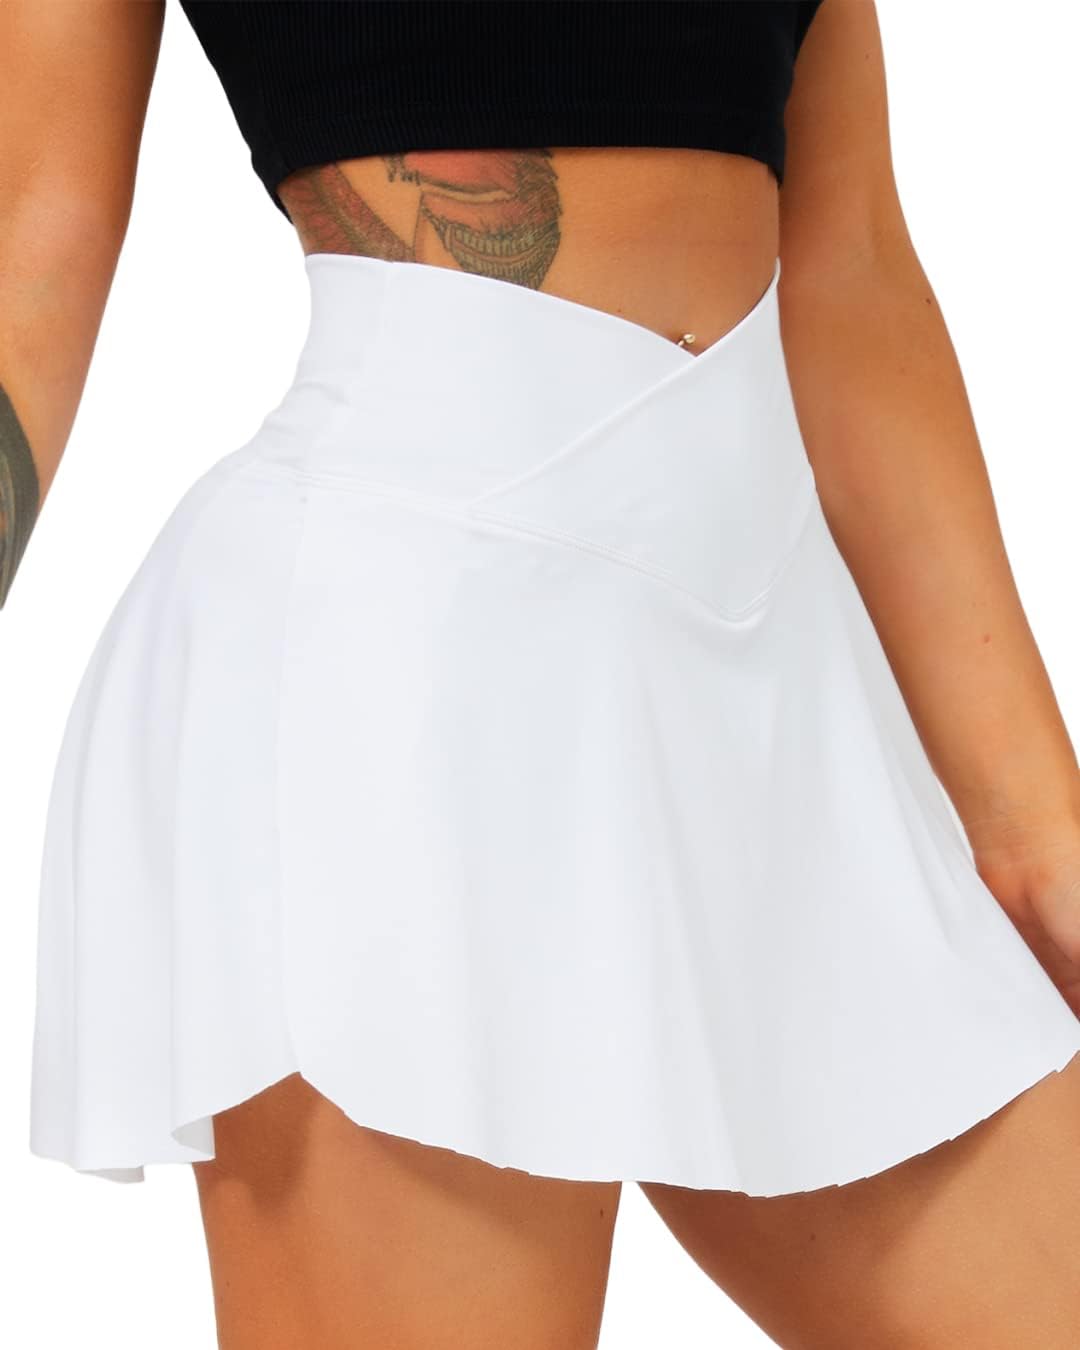 Navneet Women Pleated Tennis Skirt with Pockets Shorts Crossover High Waisted Athletic Golf Skorts Workout Sports Skirts